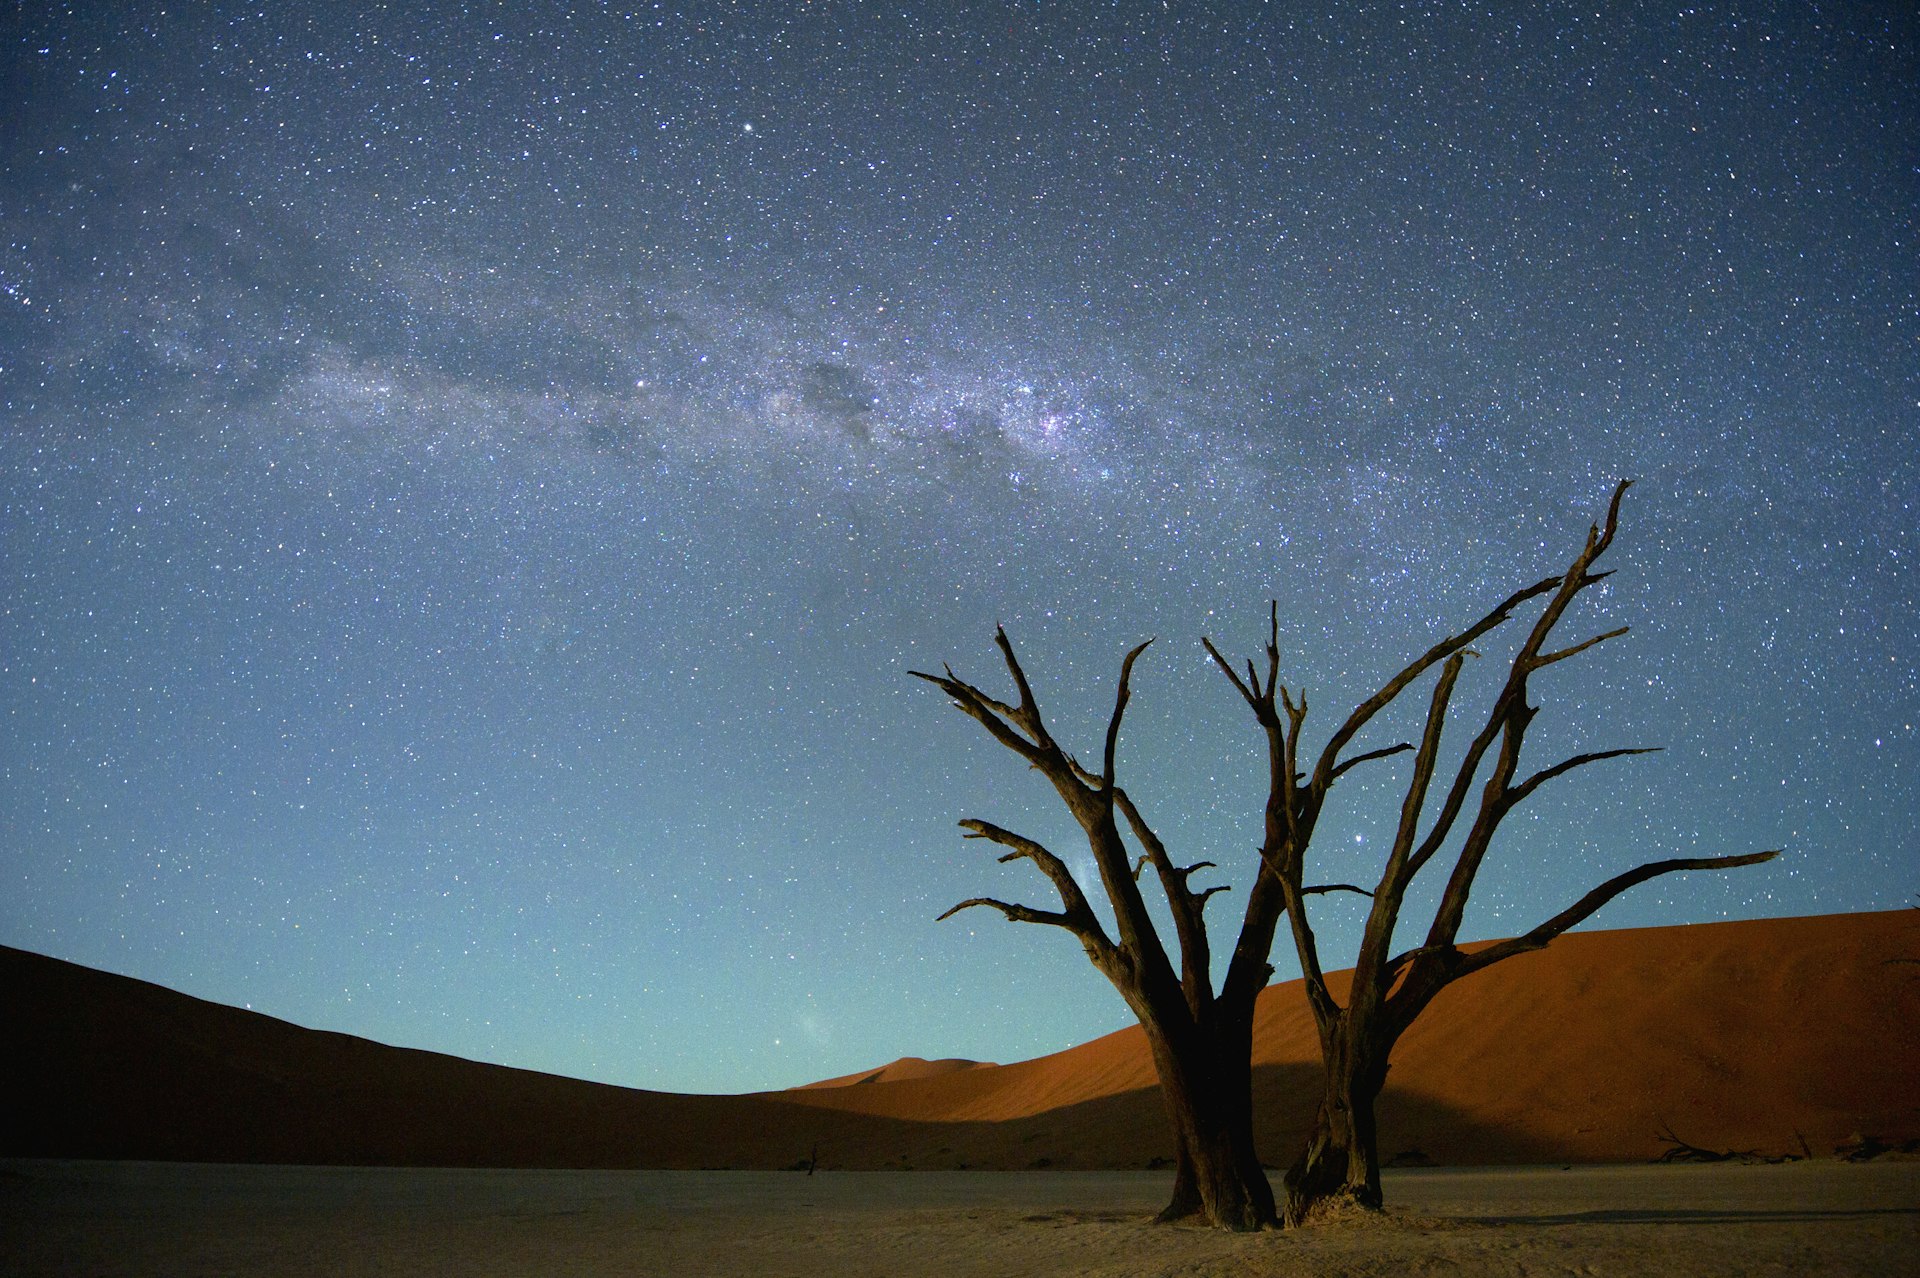 The Milky Way at night, seen behind the silhouette of a dead acacia tree, Deadvlei, Soussvlei, Namibia